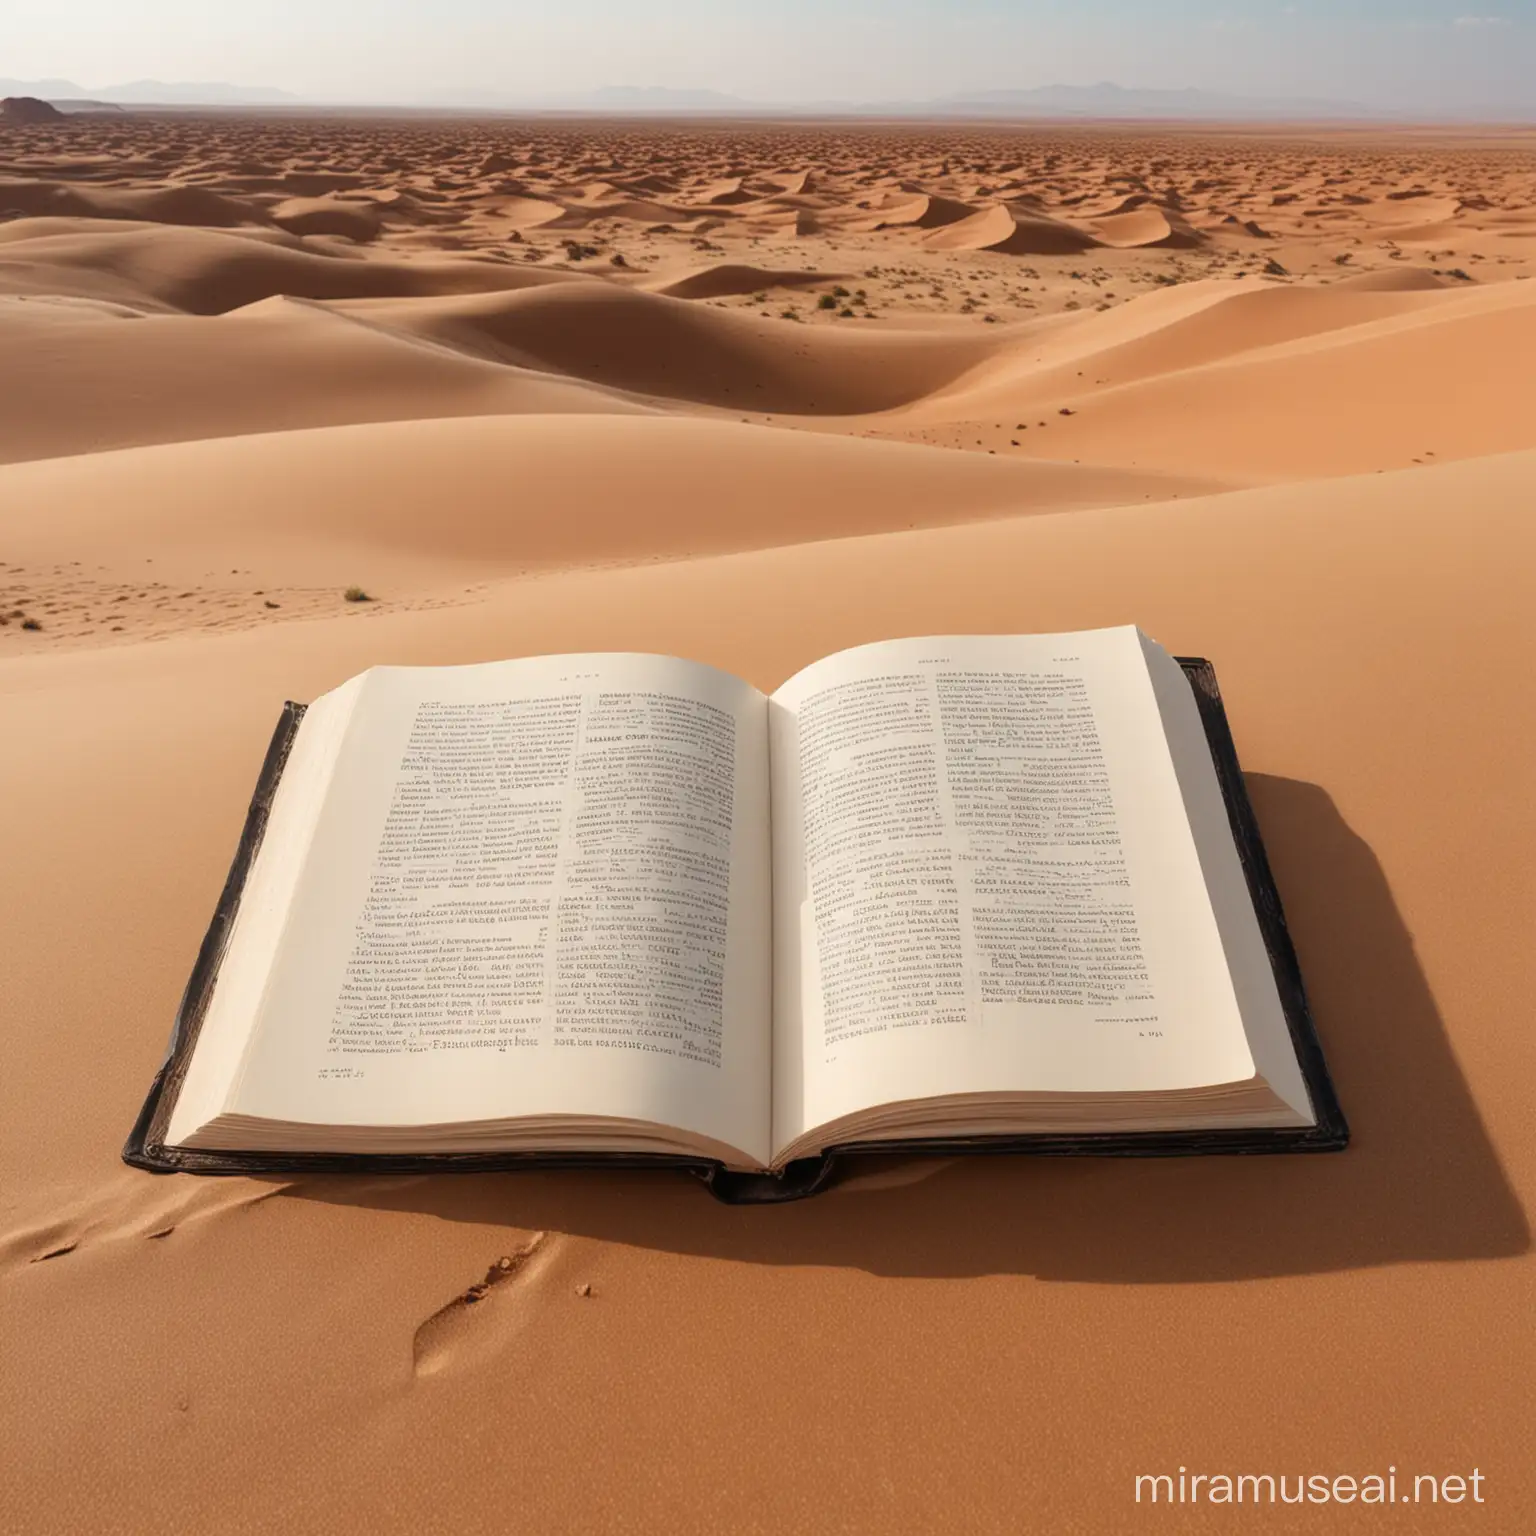 Panoramic view of open book lying on the desert of Arrakis